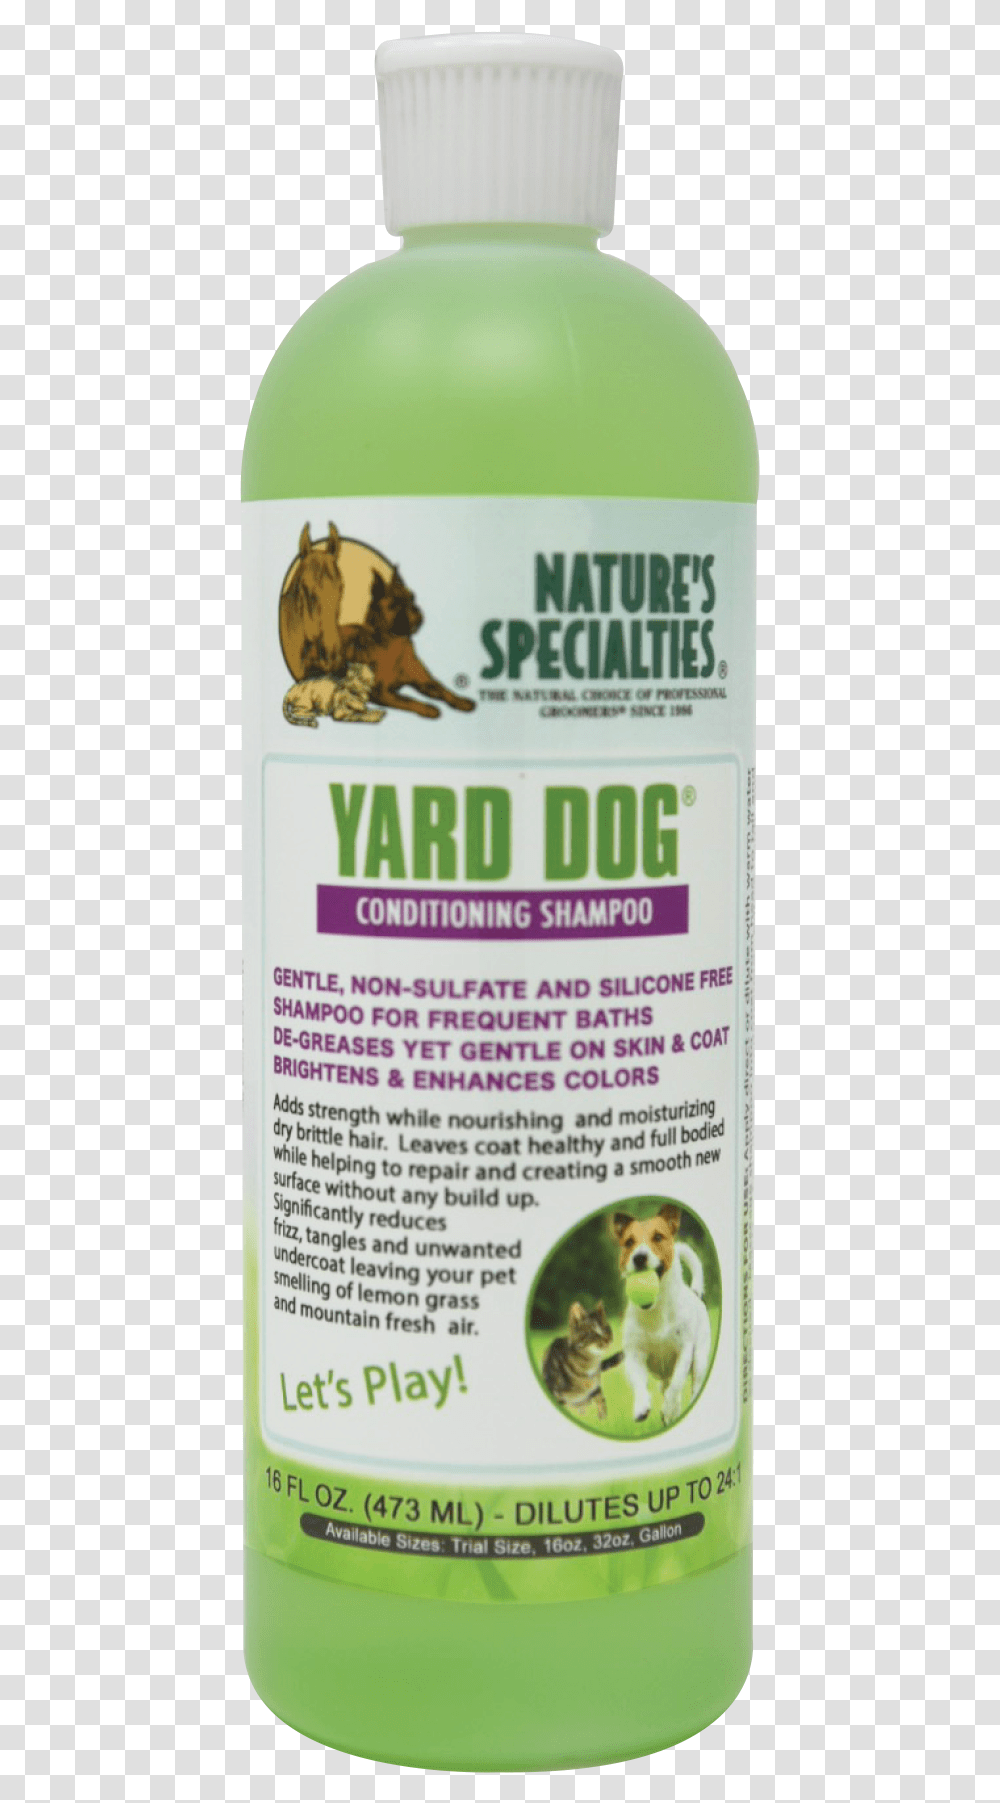 Yard Dog Shampoo For Dogs Amp CatsData Zoom Cdn Mosquito, Tin, Aluminium, Can, Beer Transparent Png